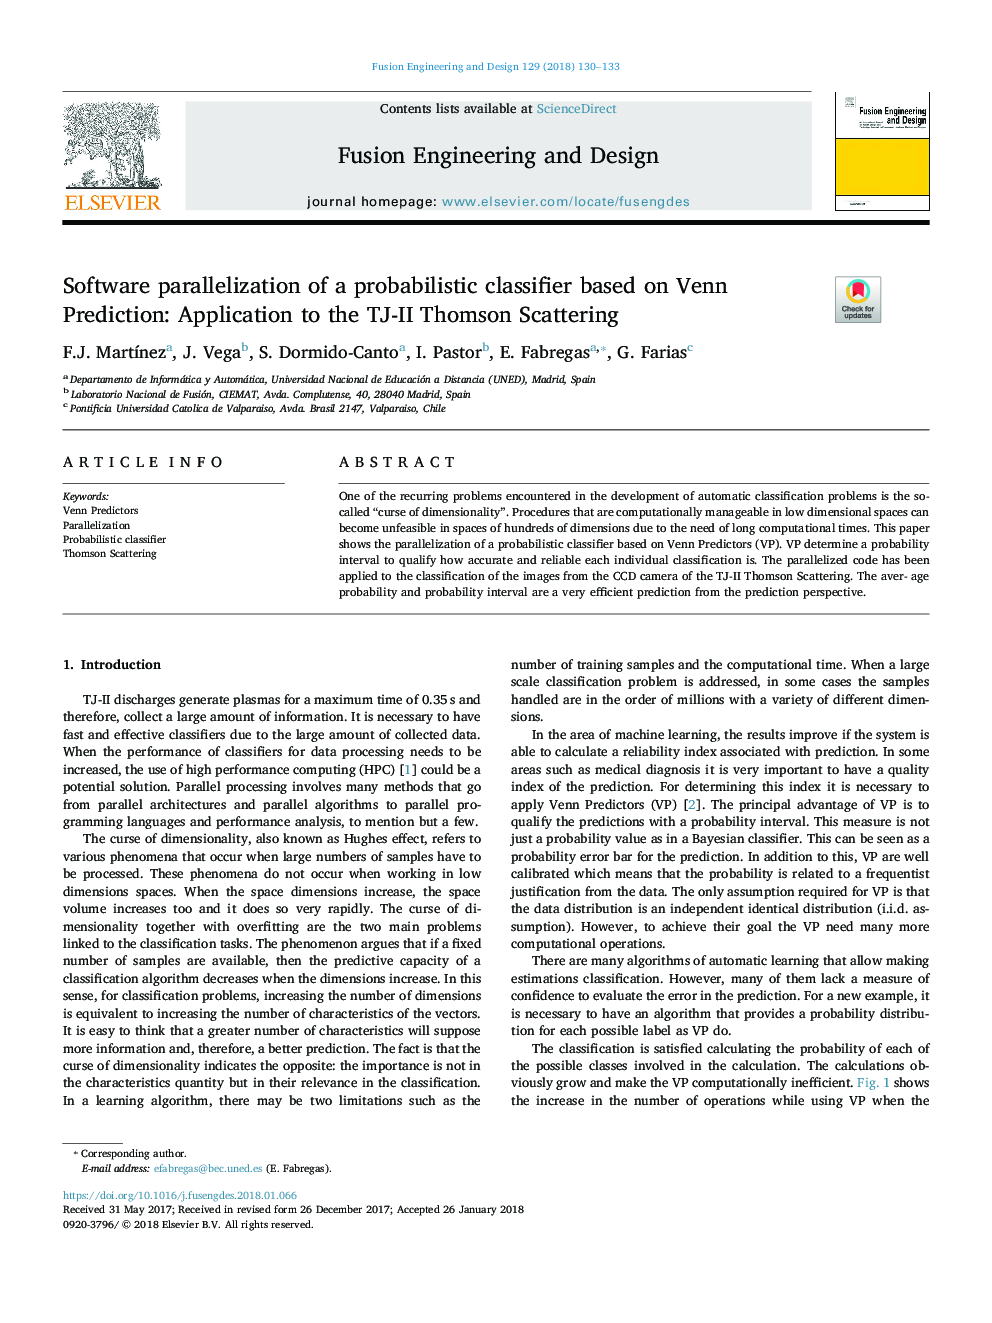 Software parallelization of a probabilistic classifier based on Venn Prediction: Application to the TJ-II Thomson Scattering